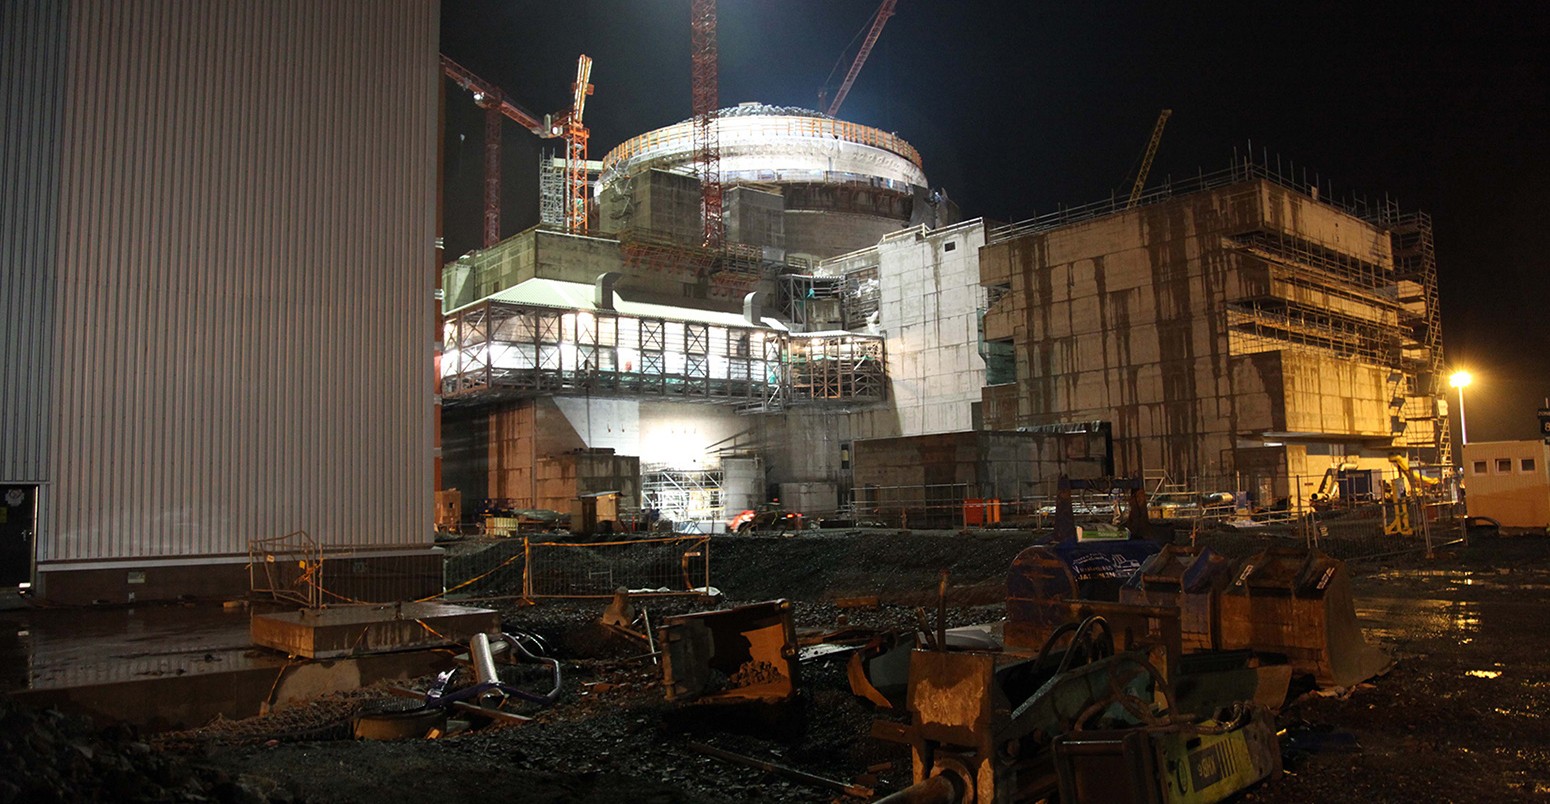 Nuclear power station being built at Oikiluoto in southern Finland